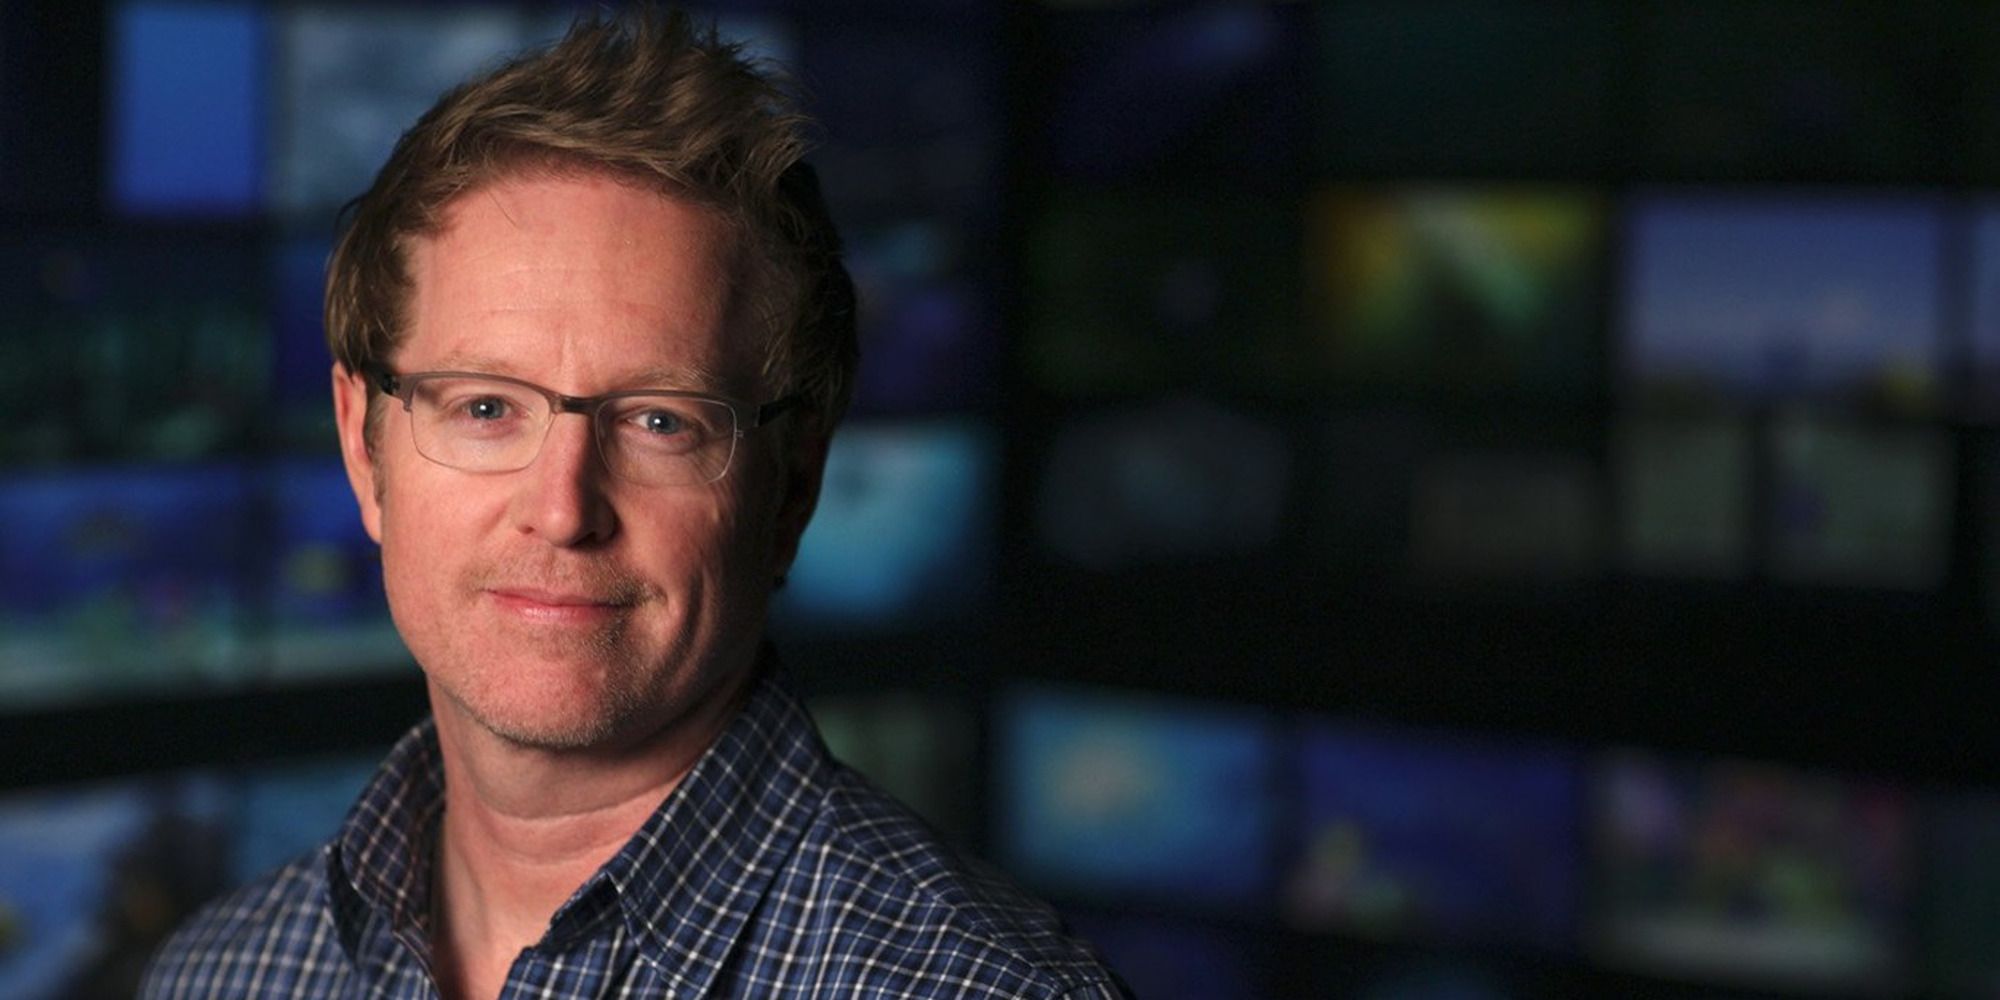 Andrew Stanton wearing glasses and a blue shirt, smiling at the camera